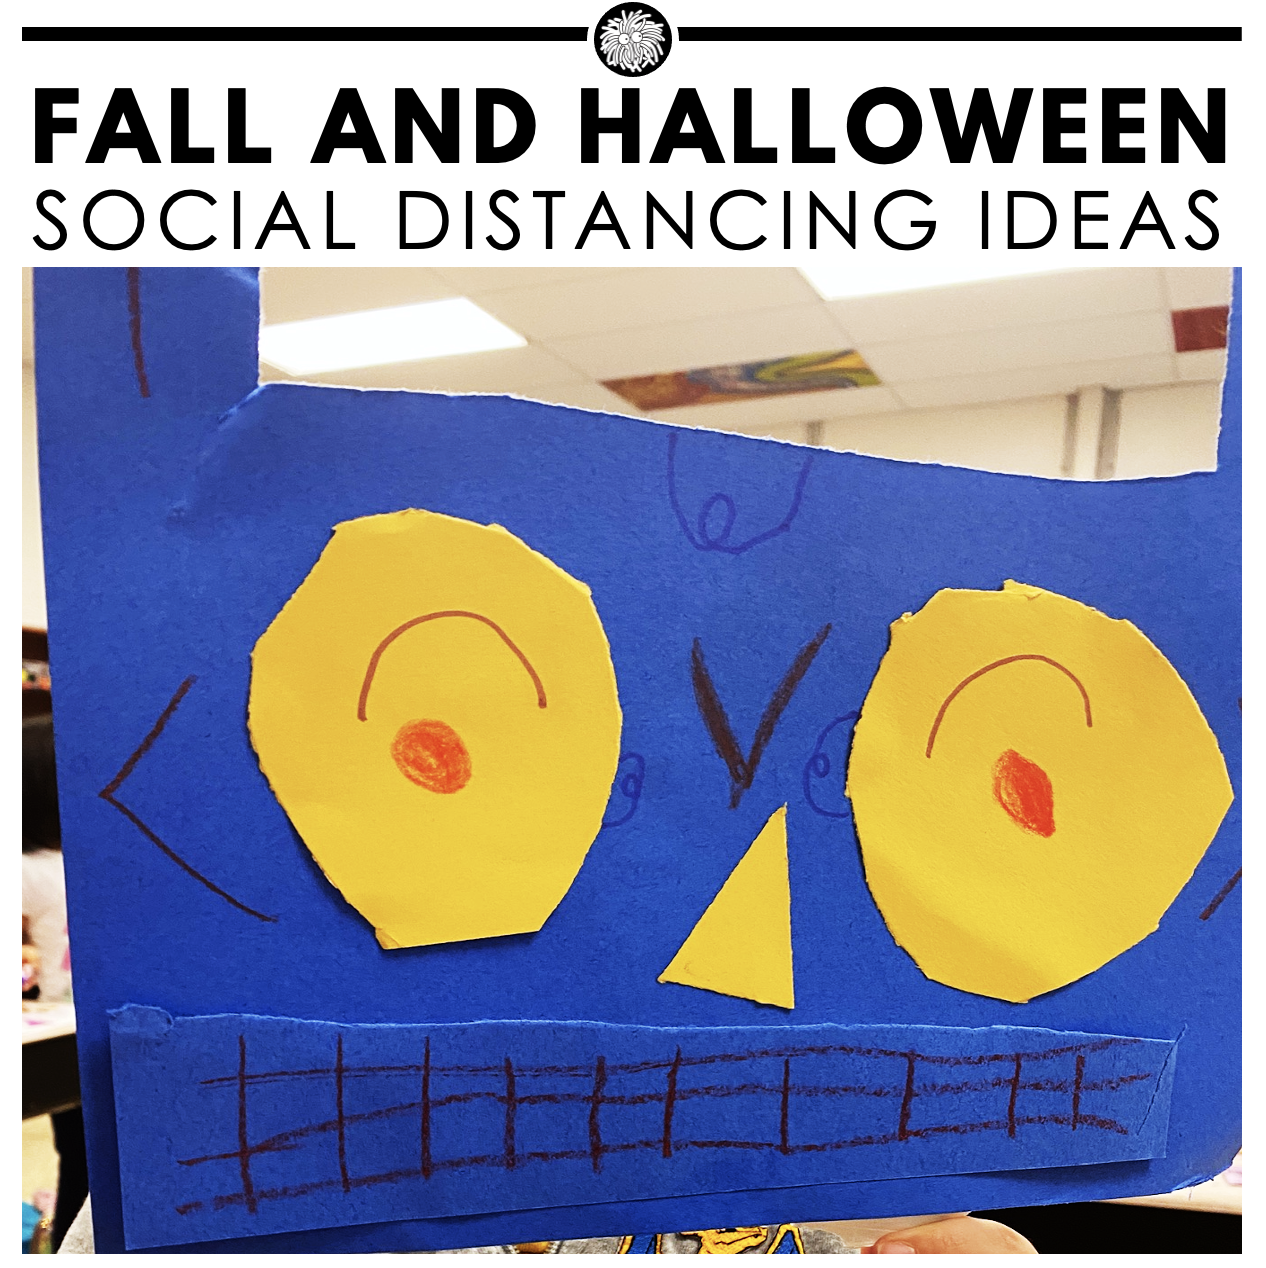 Fall and Halloween Party Social Distancing Ideas